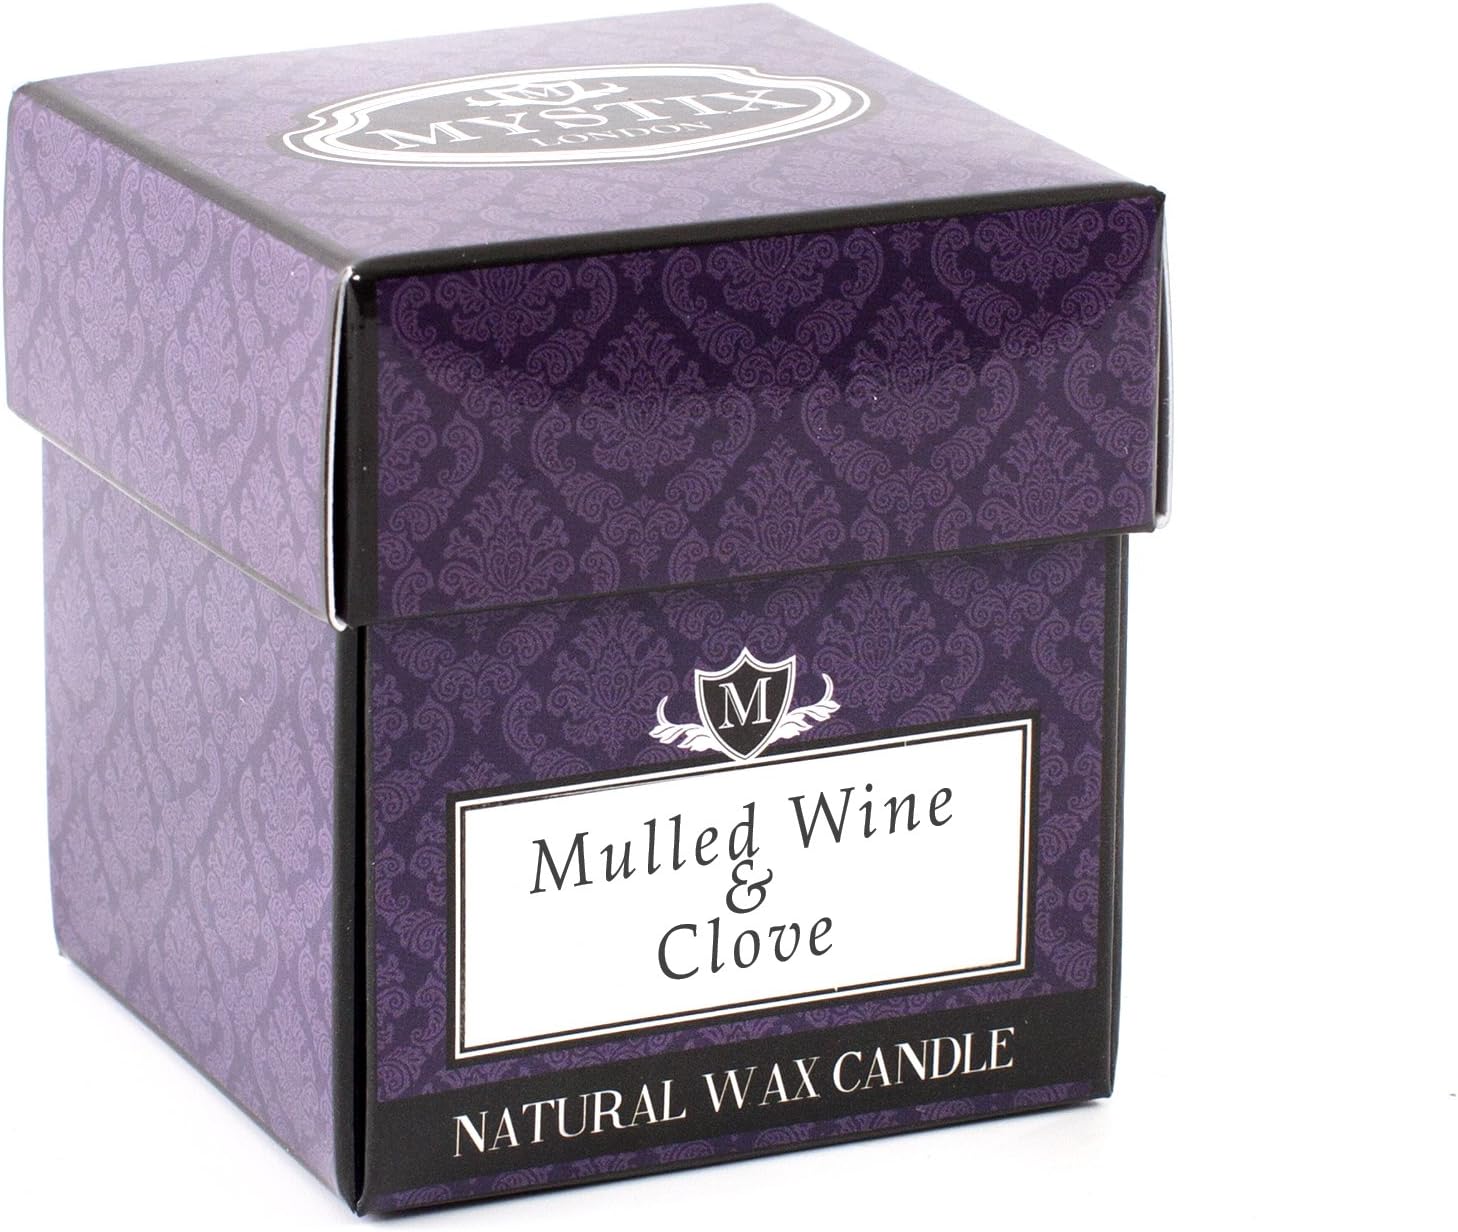 Mystix London | Mulled Wine & Clove - Scented Candle Small 8cl | Best Aroma for Home, Kitchen, Living Room and Bathroom | Perfect as a Gift | Reusable Glass Jar